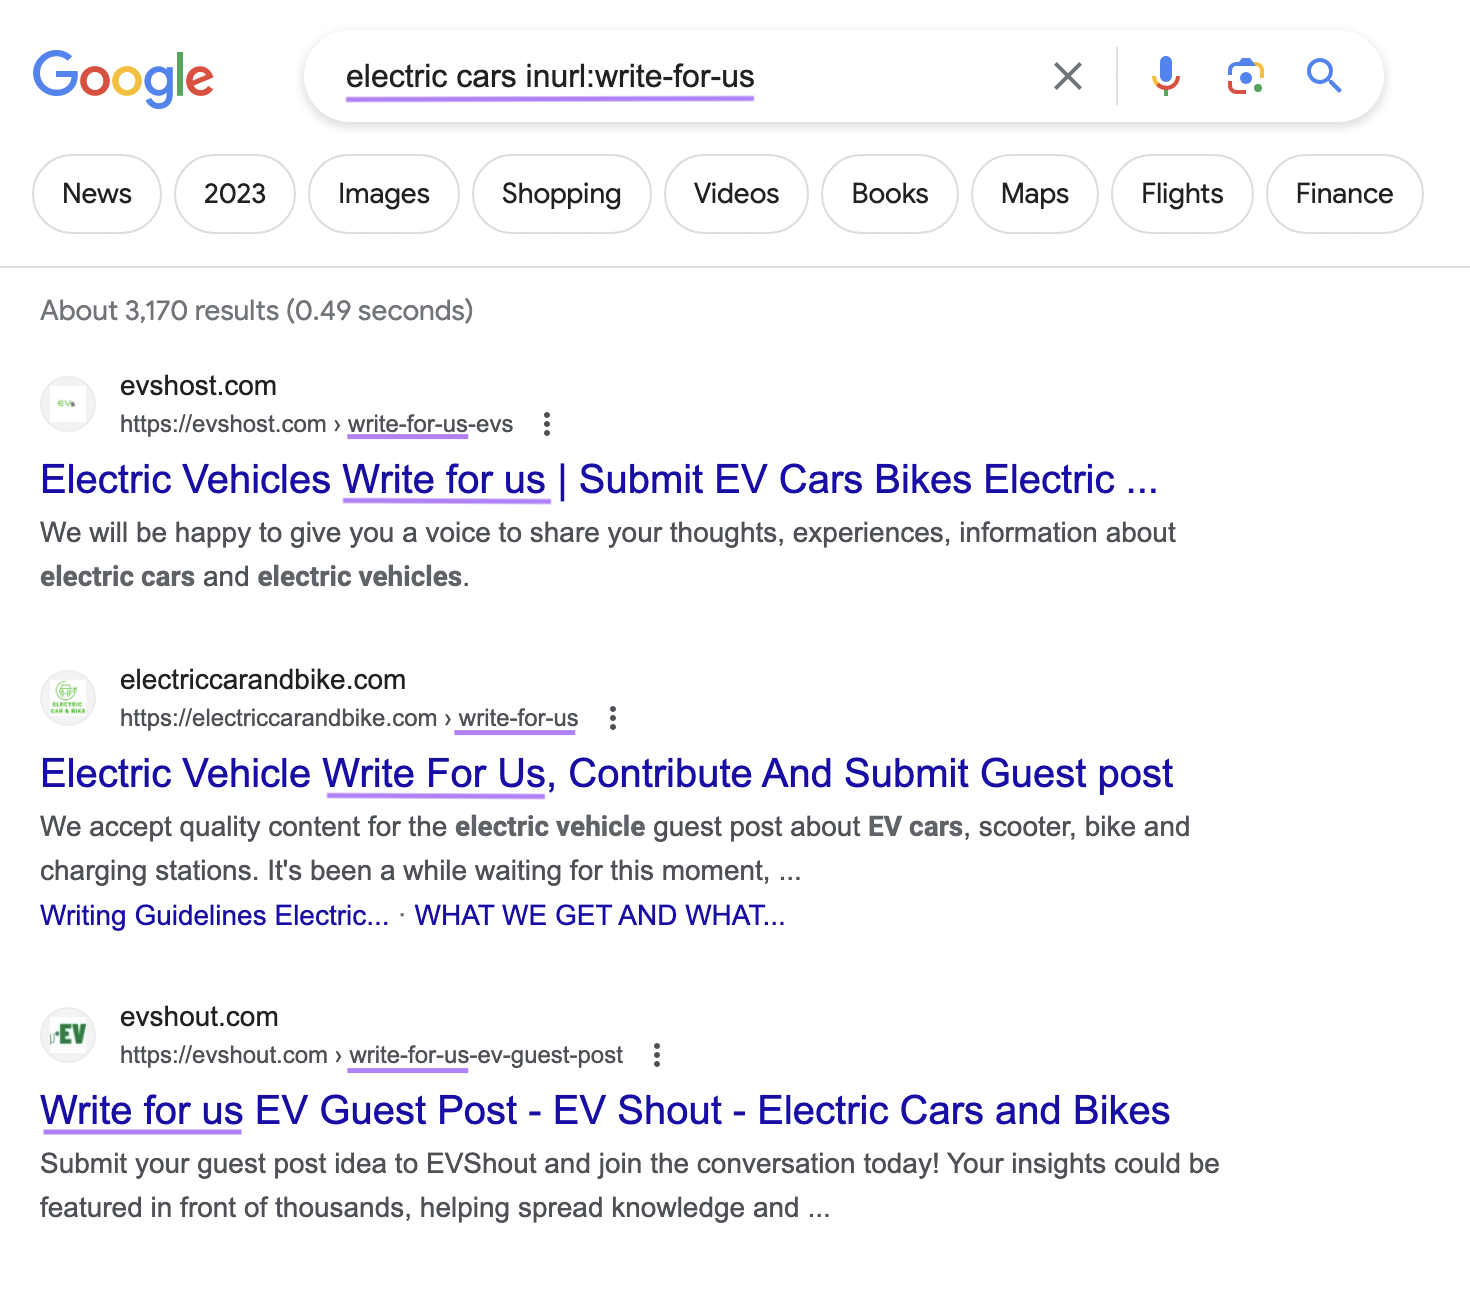 Google SERP for "electric cars “inurl:write-for-us”